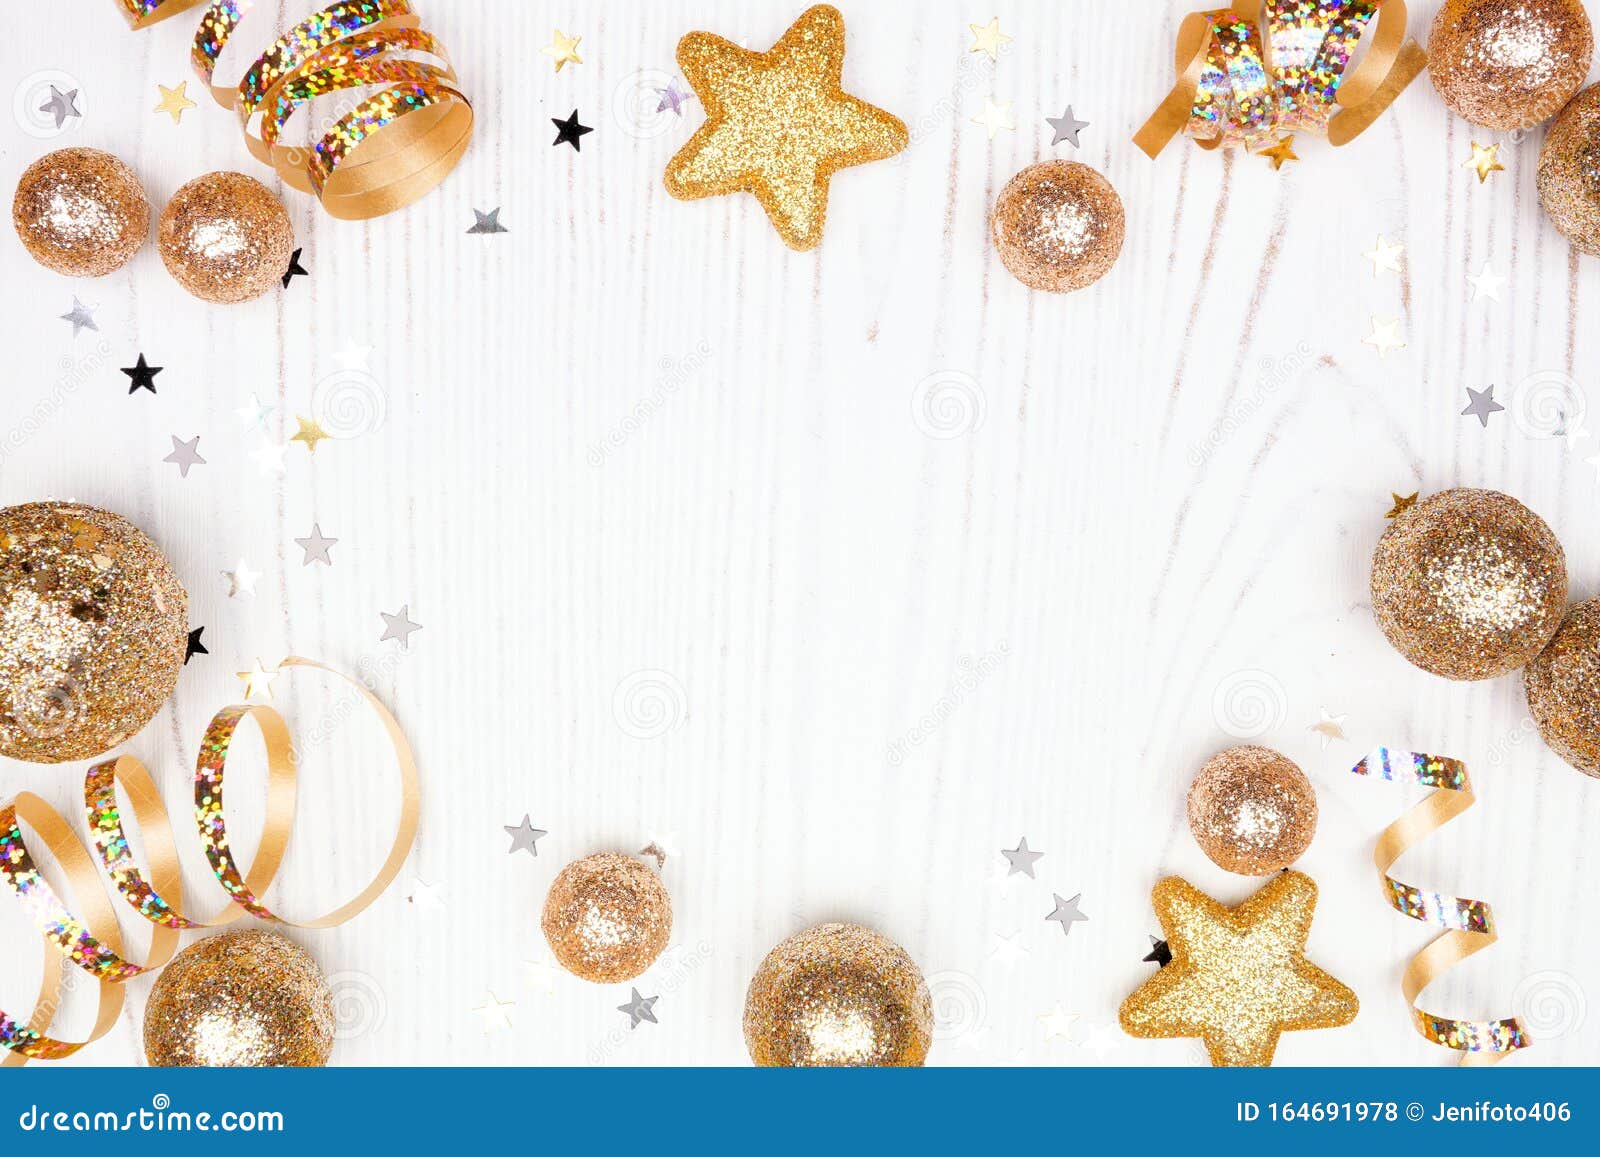 New Years Eve Frame of Confetti, Streamers and Gold Decorations, Top View  Over a White Wood Background Stock Photo - Image of bright, seasonal:  164691978